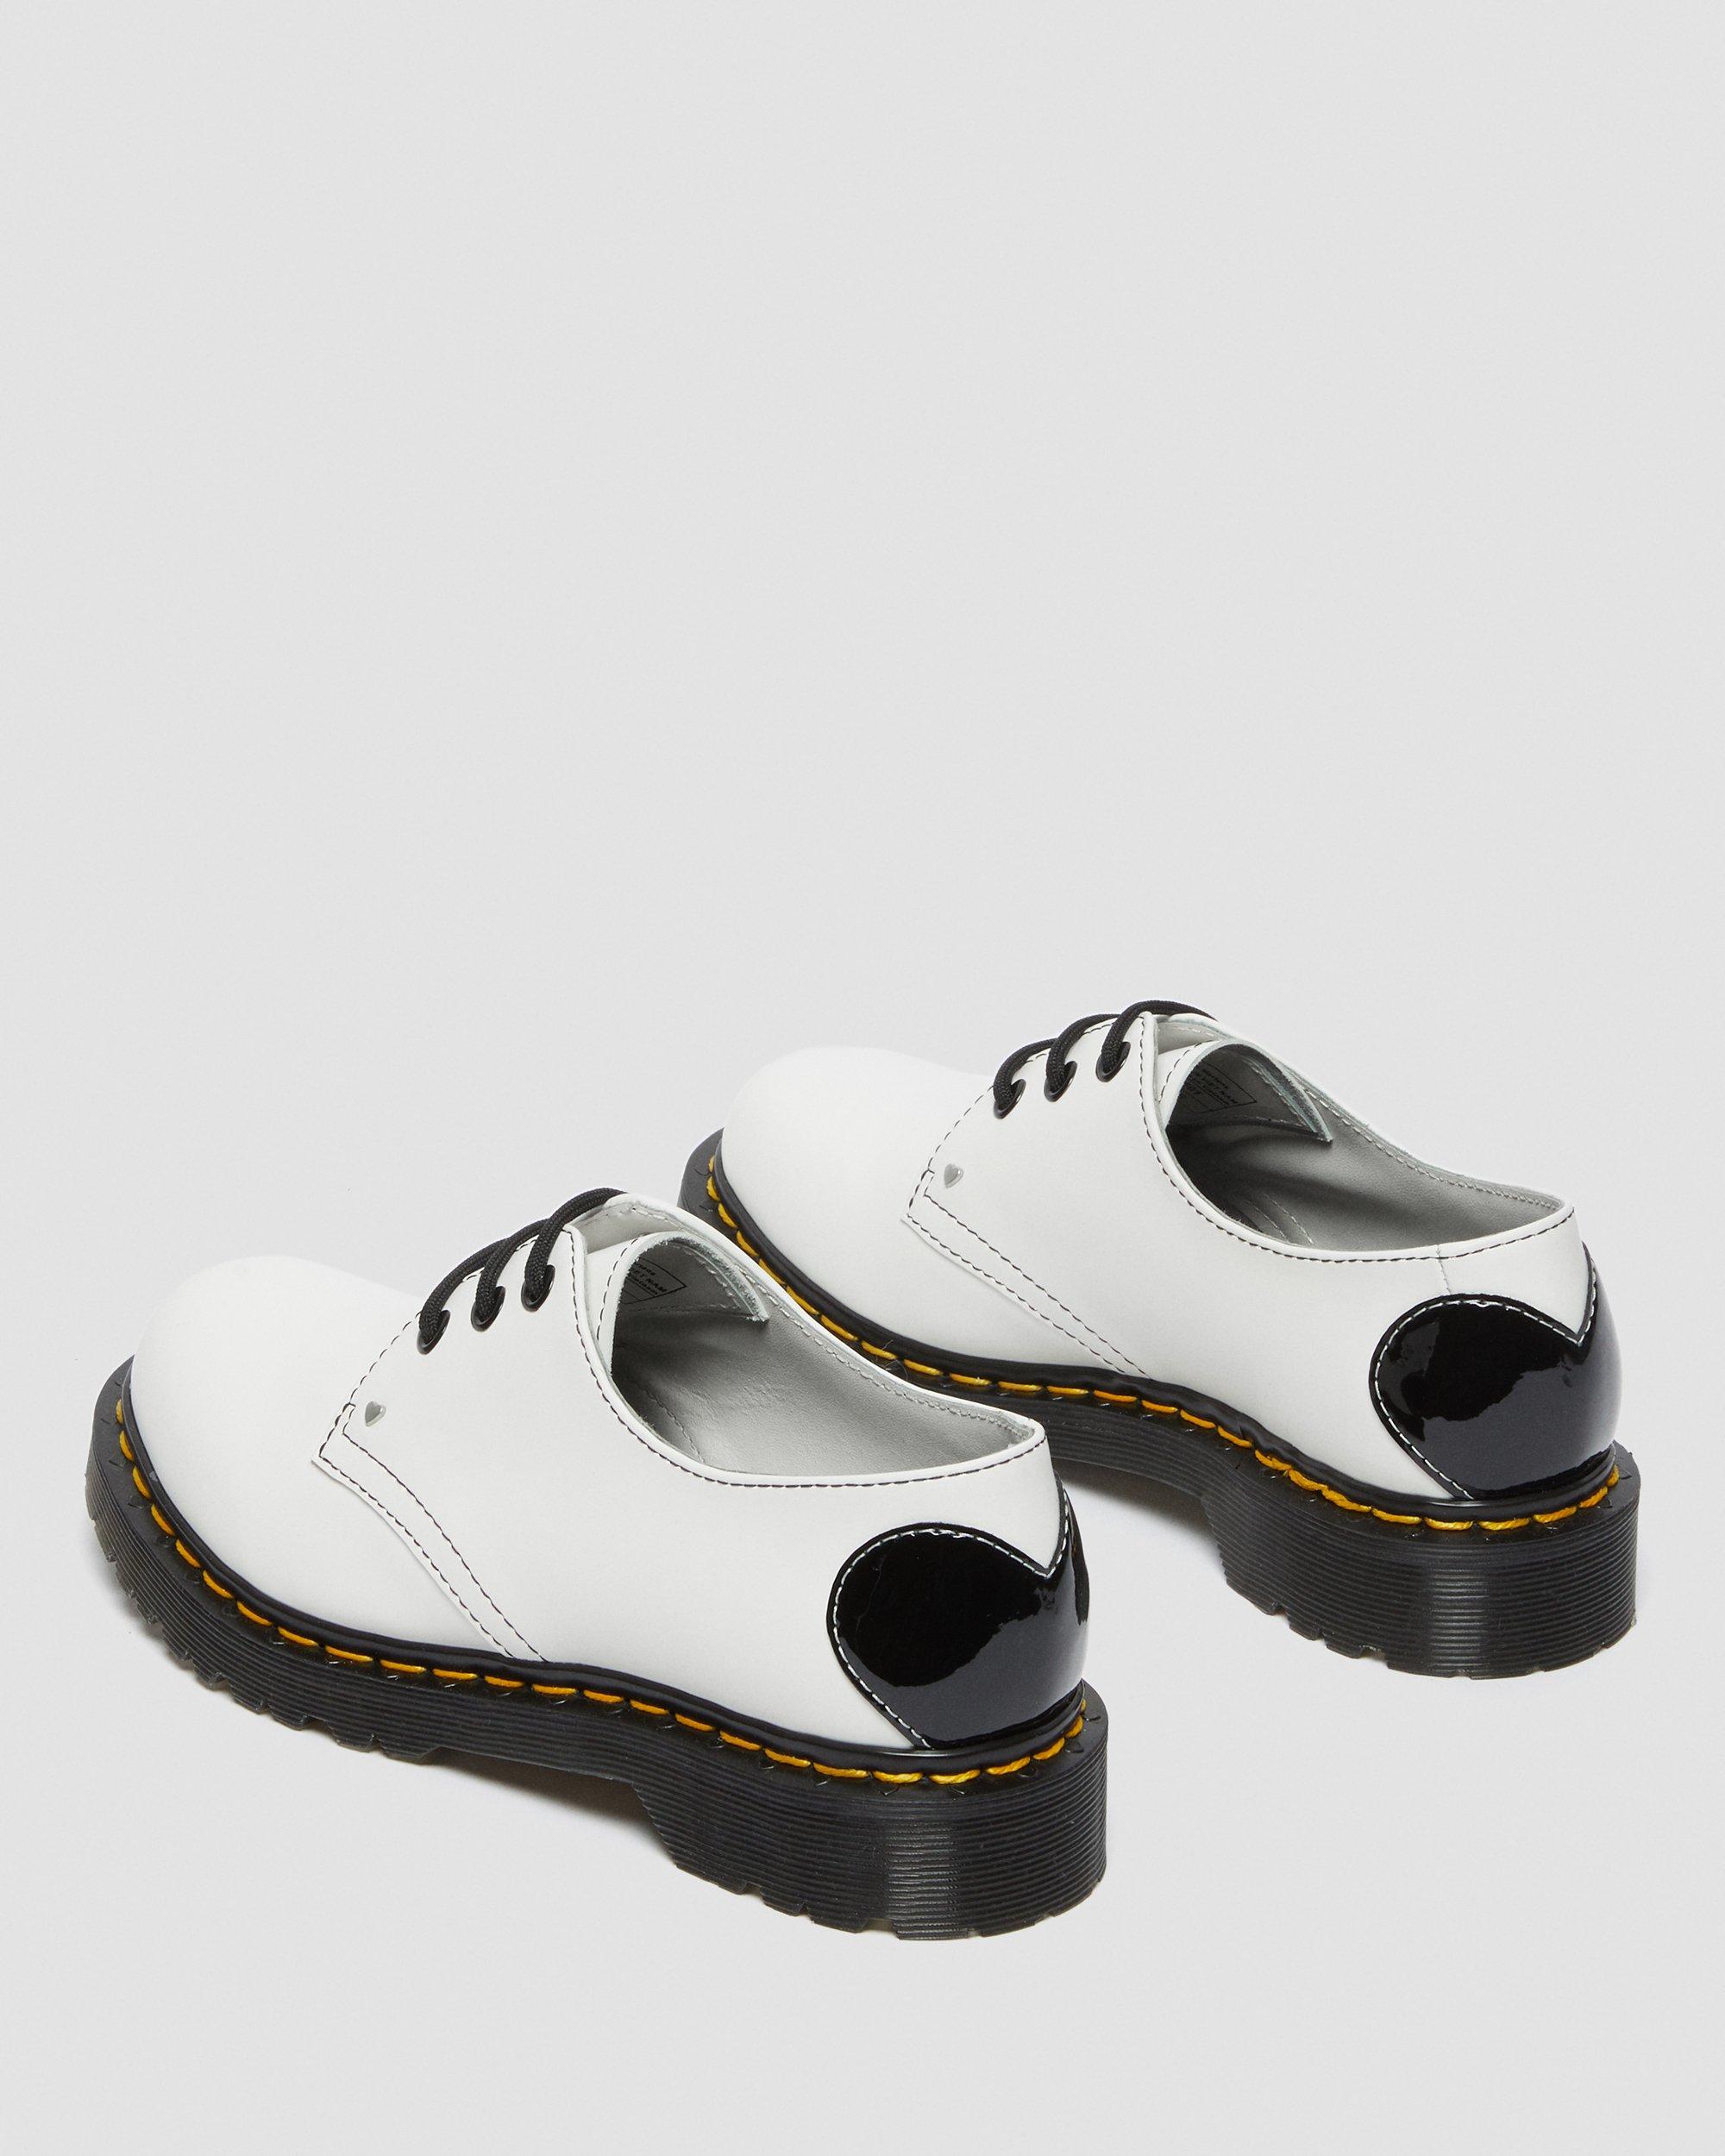 DR MARTENS 1461 Hearts Smooth & Patent Leather Oxford Shoes